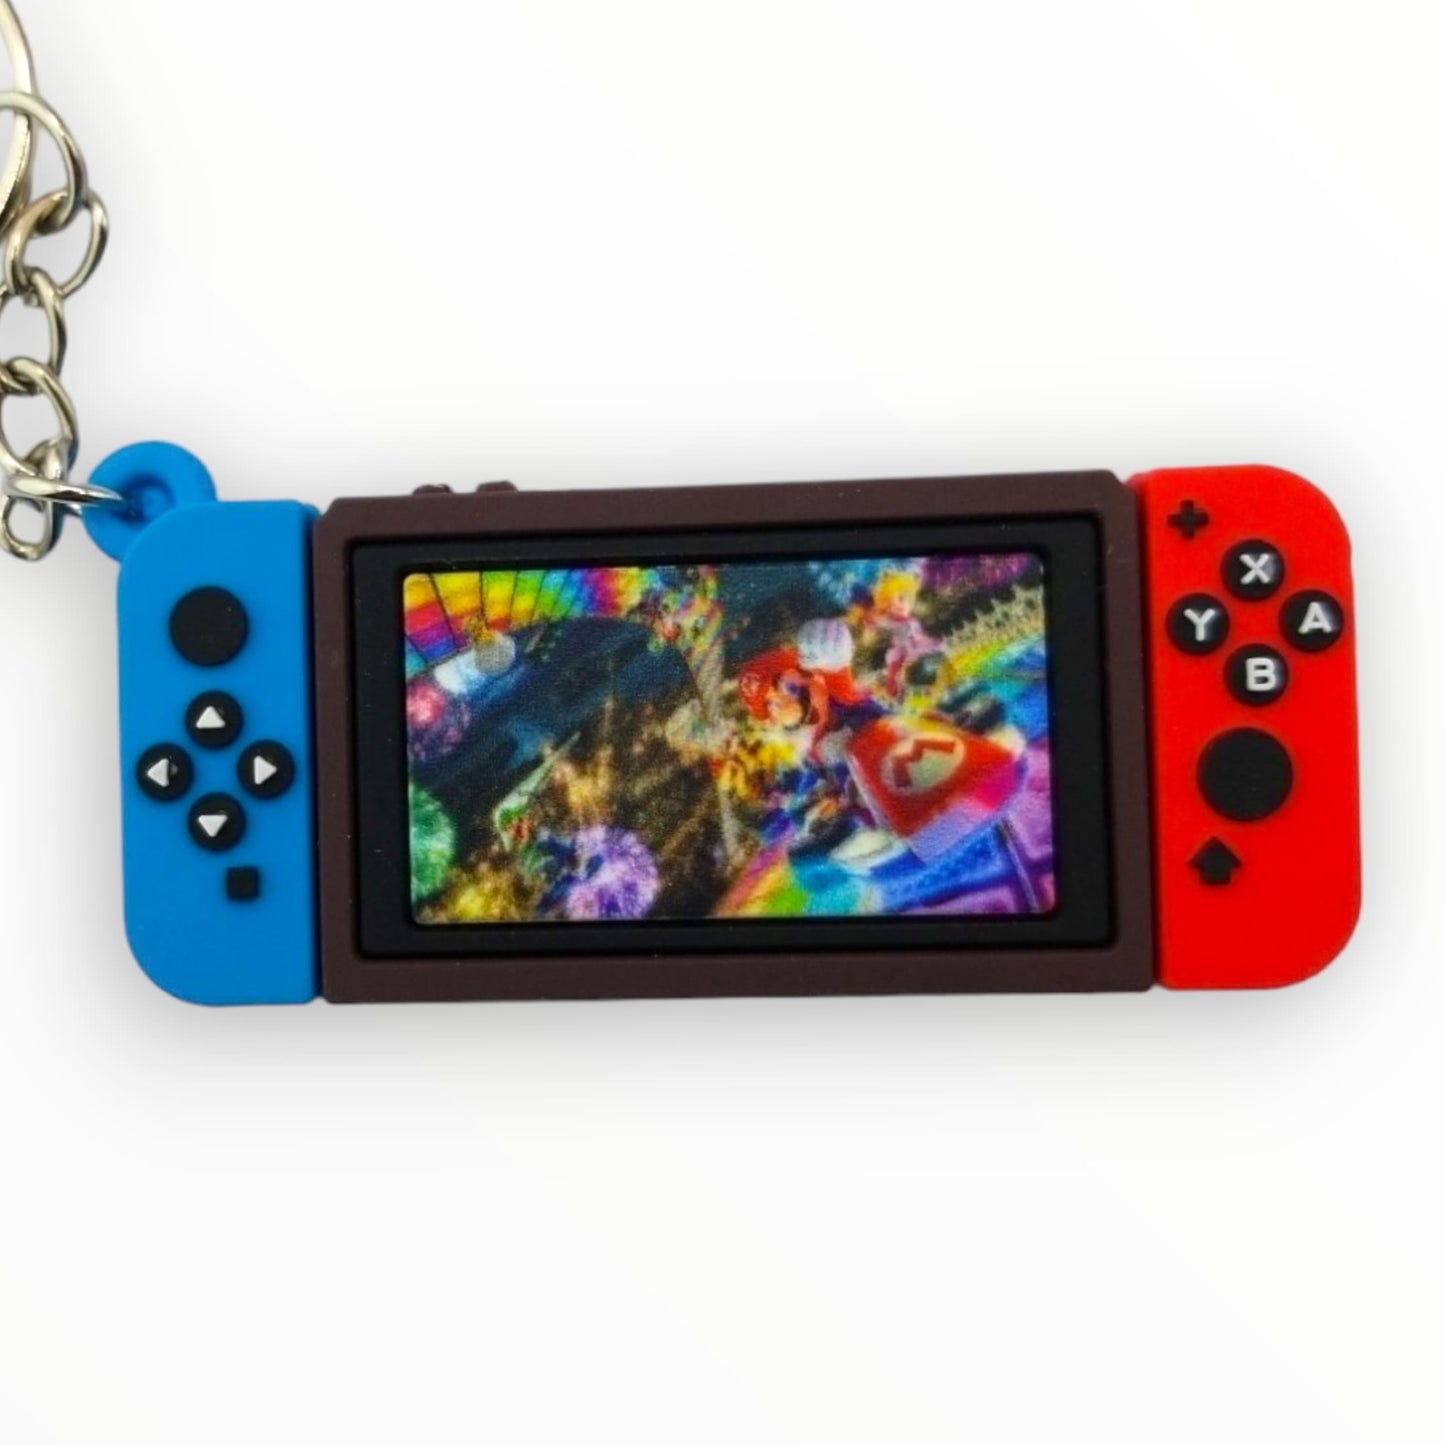 Nintendo Switch Super Mario Controller Replica Keychain from Confetti Kitty, Only 9.99